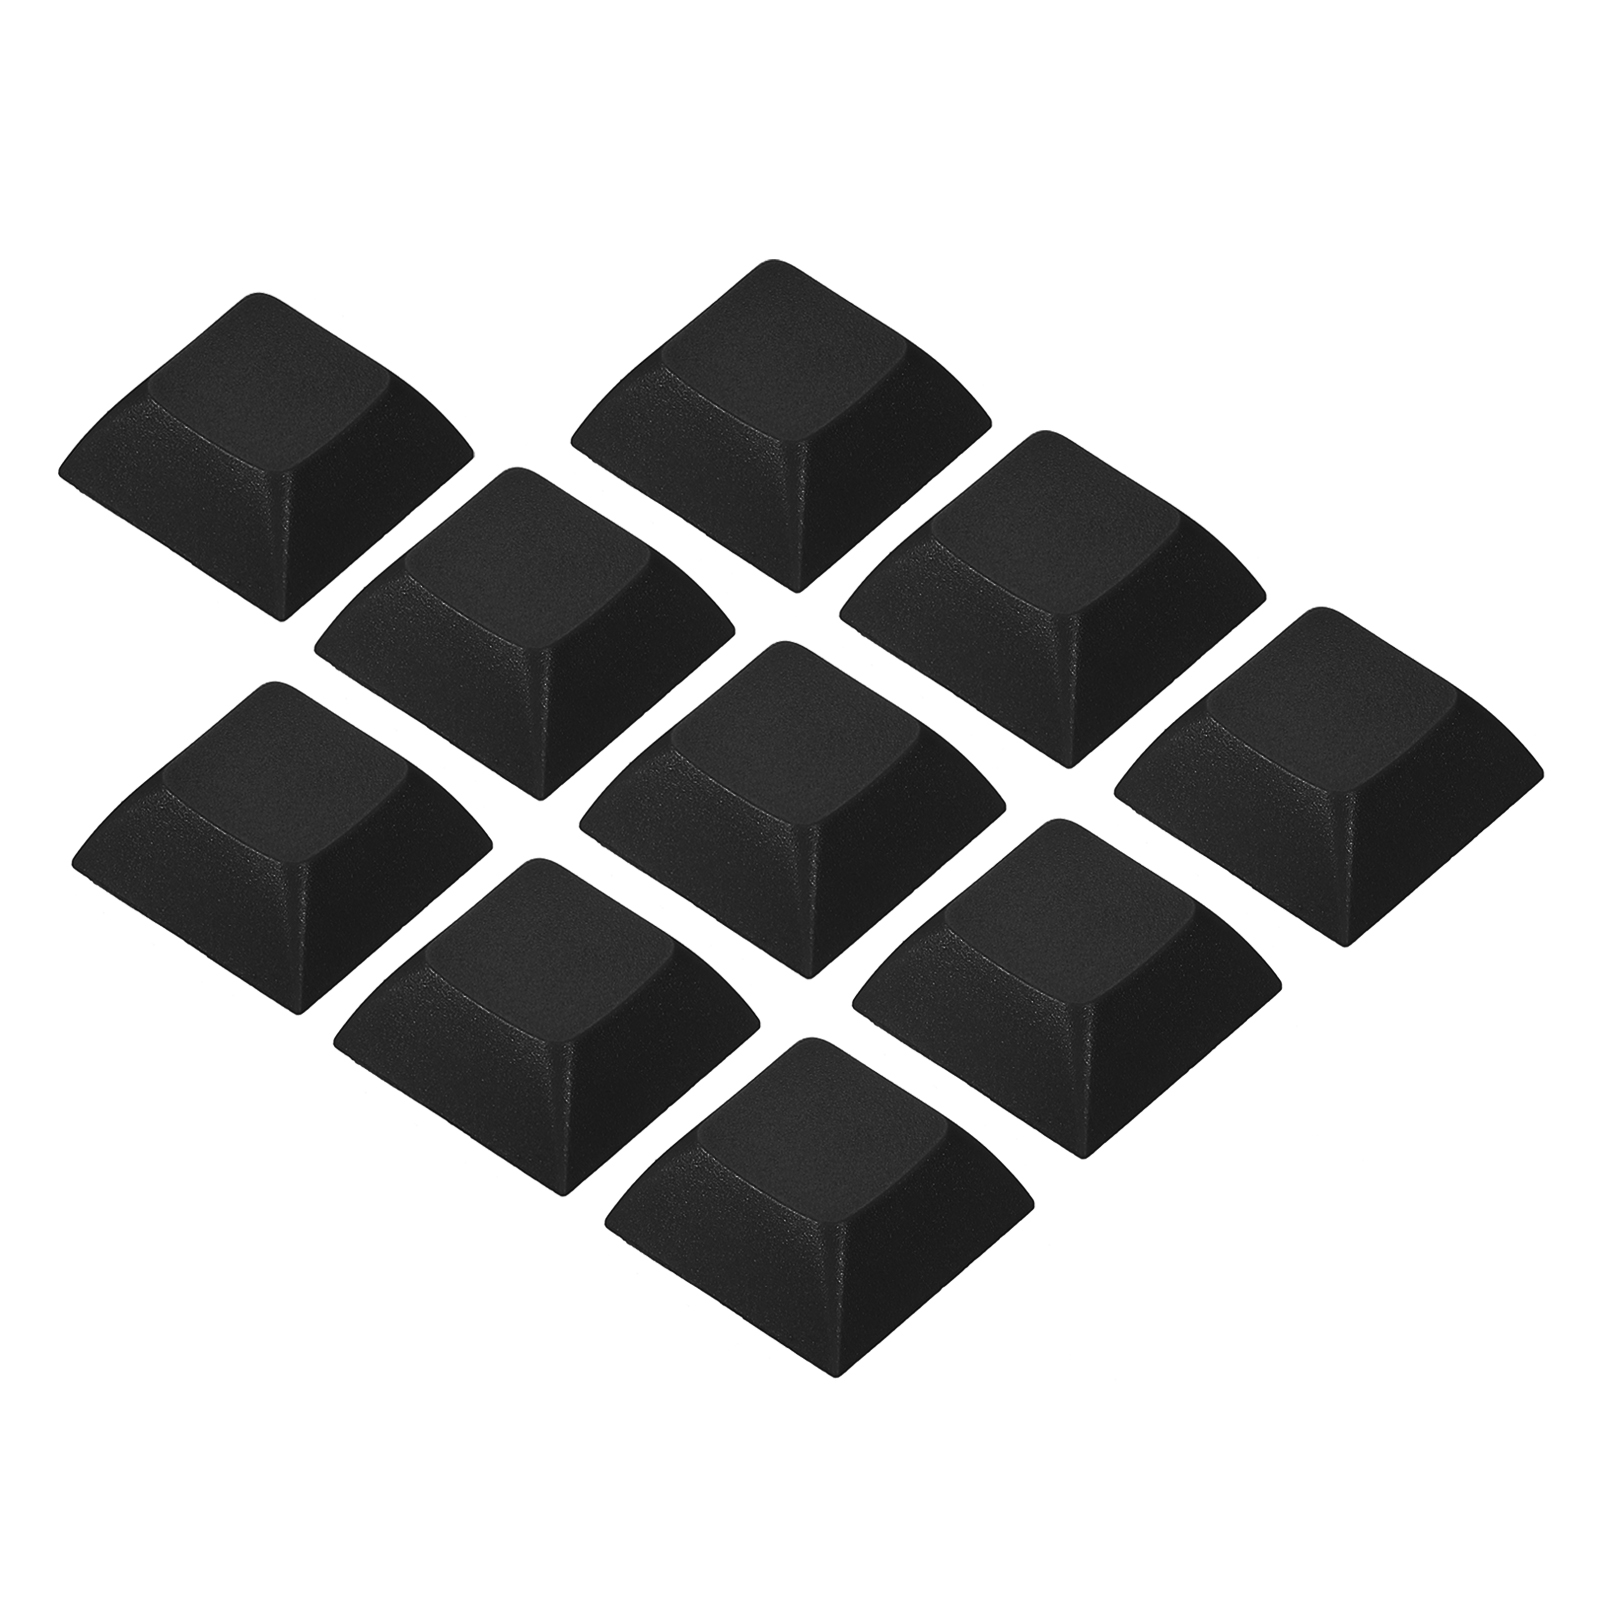 Uxcell 1U Blank Keycaps PBT Universal Keyboard Replacement Accessories for  MX Mechanical Keyboard, Black 10 Pack